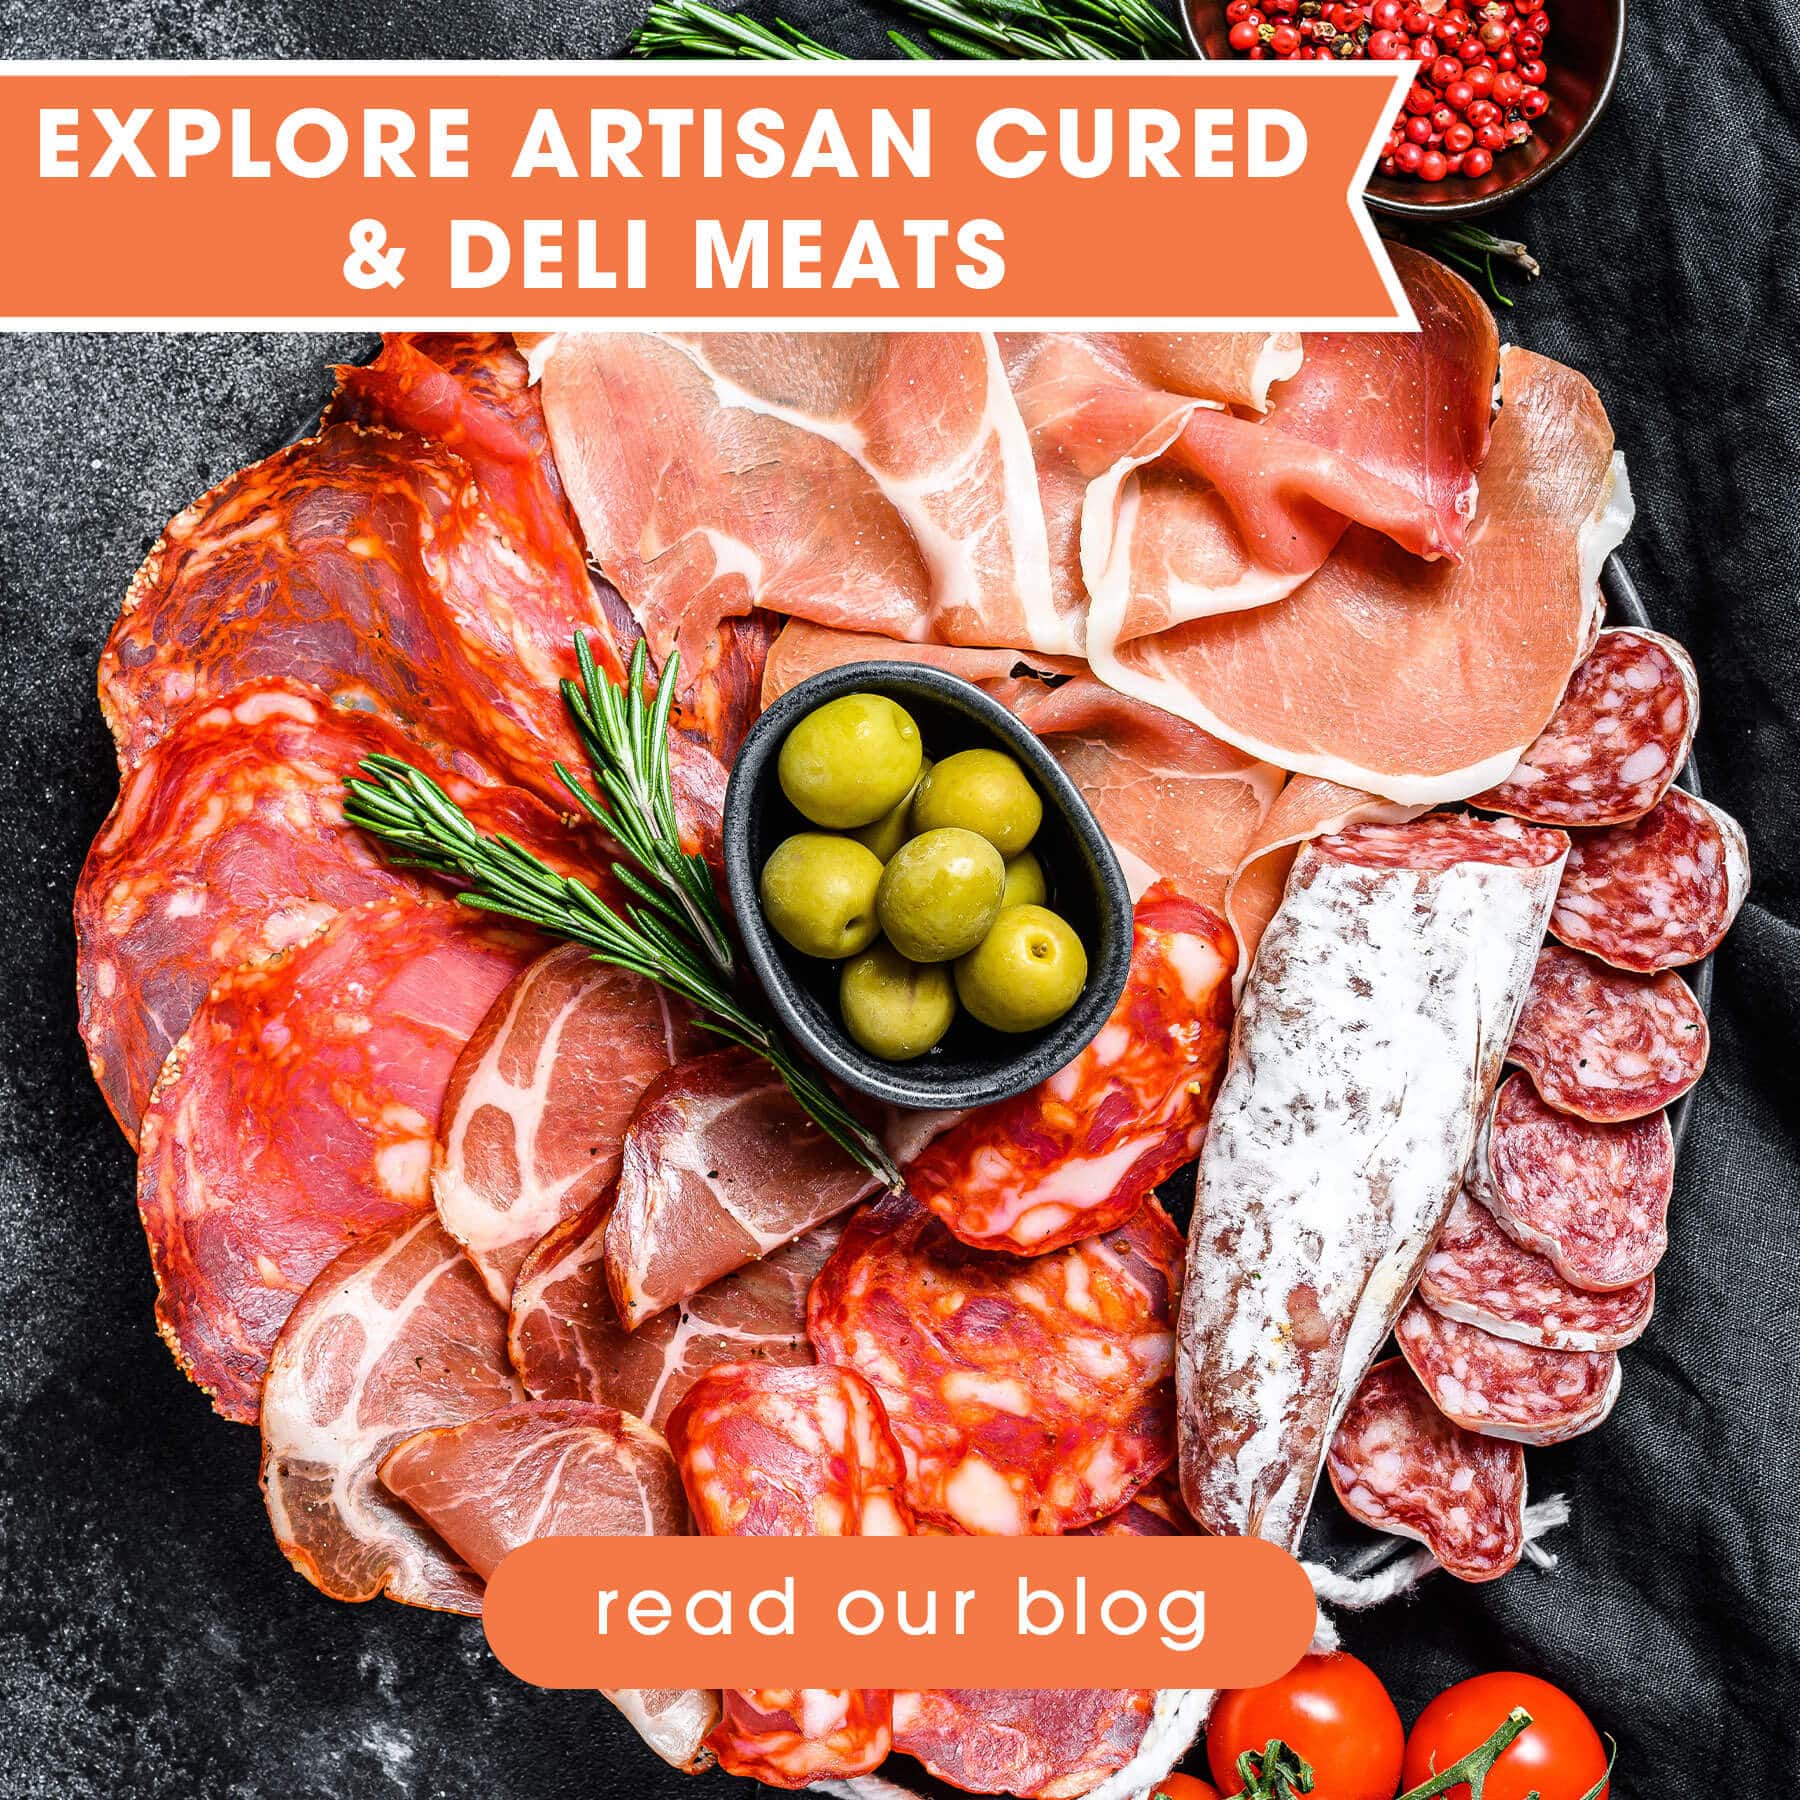 Learn more about the Gourmet Artisan Cured Meats and Deli Meats We Carry - Read Our Blog | Food Related | San Antonio TX